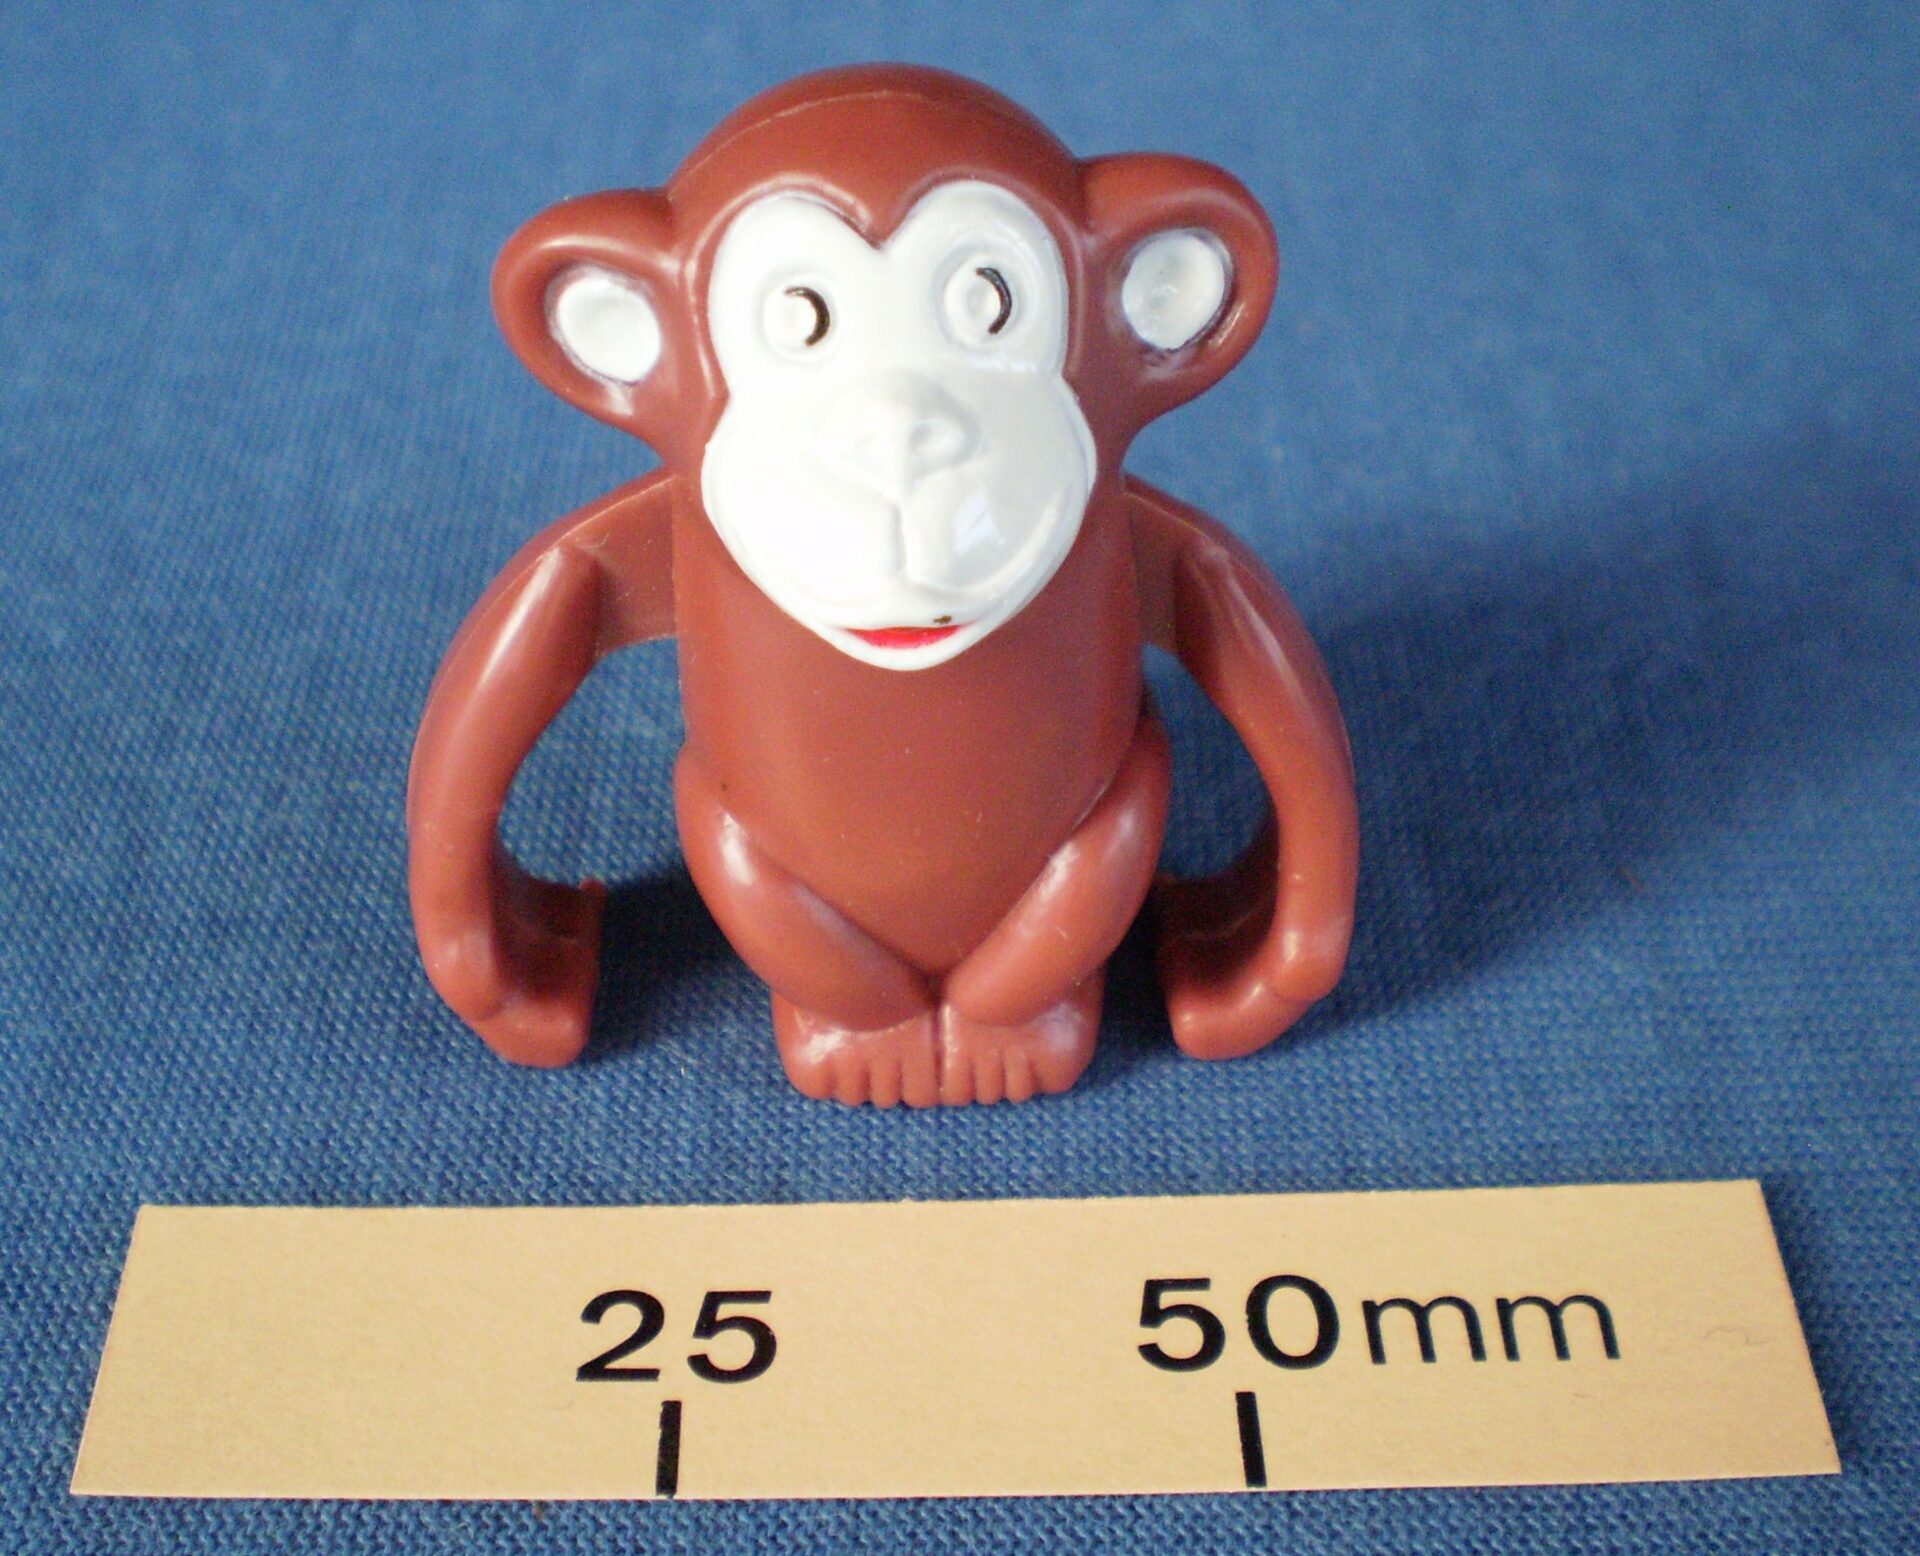 Plastic wind up walking monkey, made in China